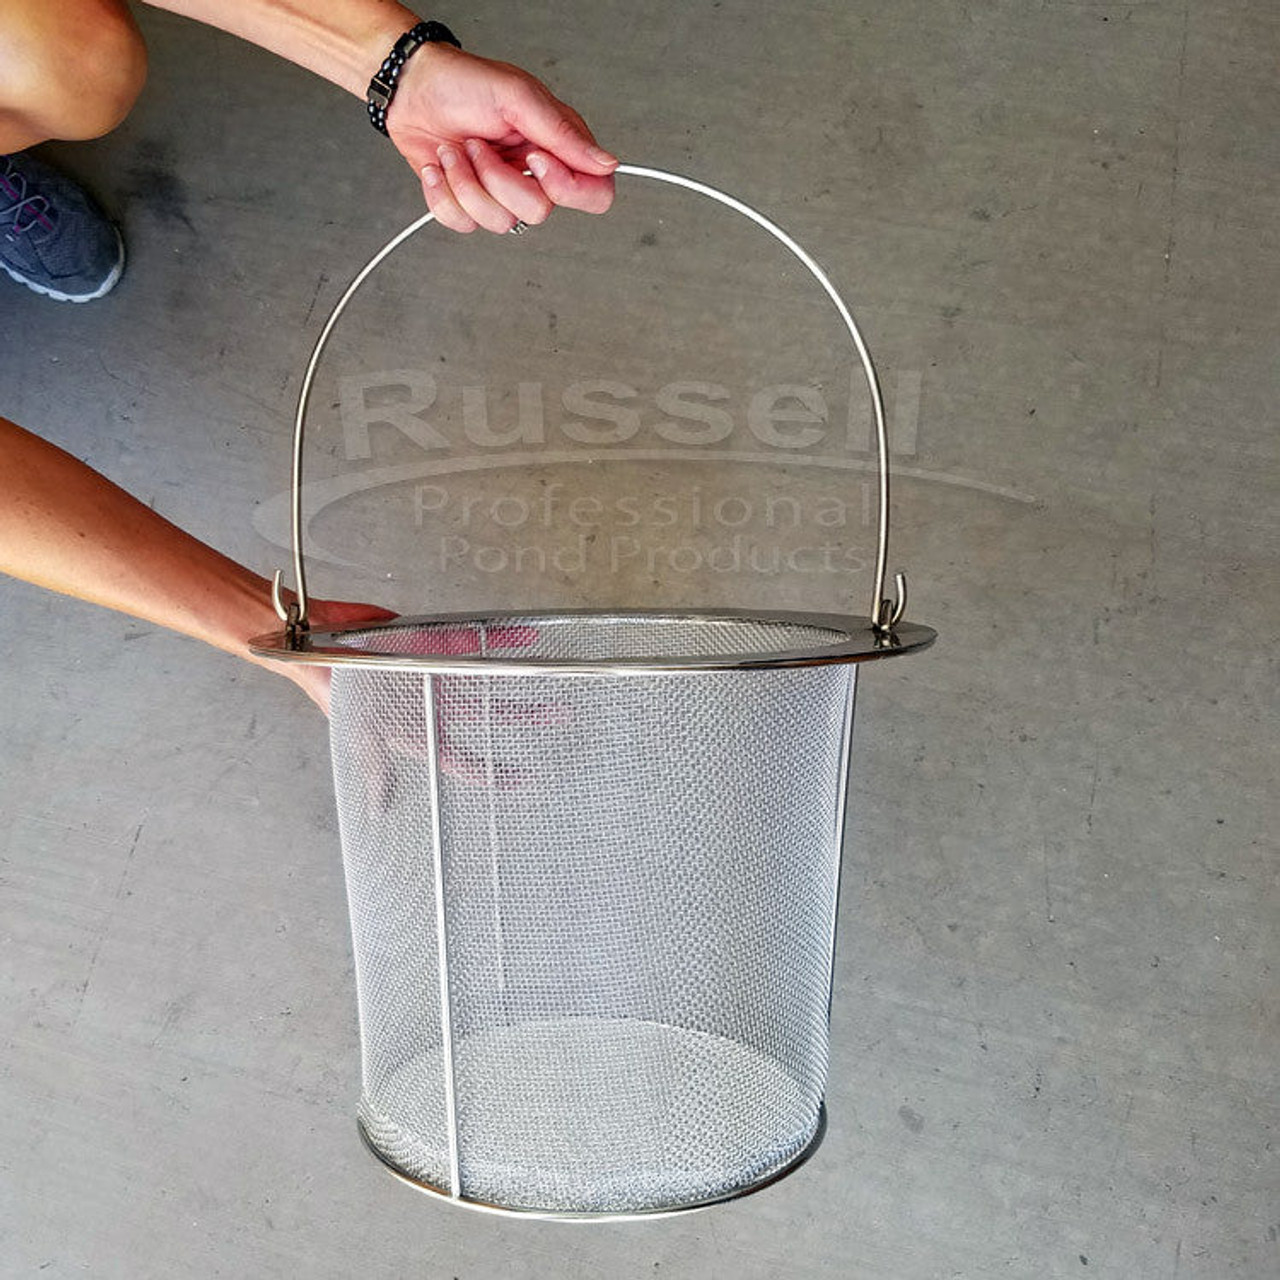 Russell Replacement Large Mesh Basket for Satellite Pond Skimmer